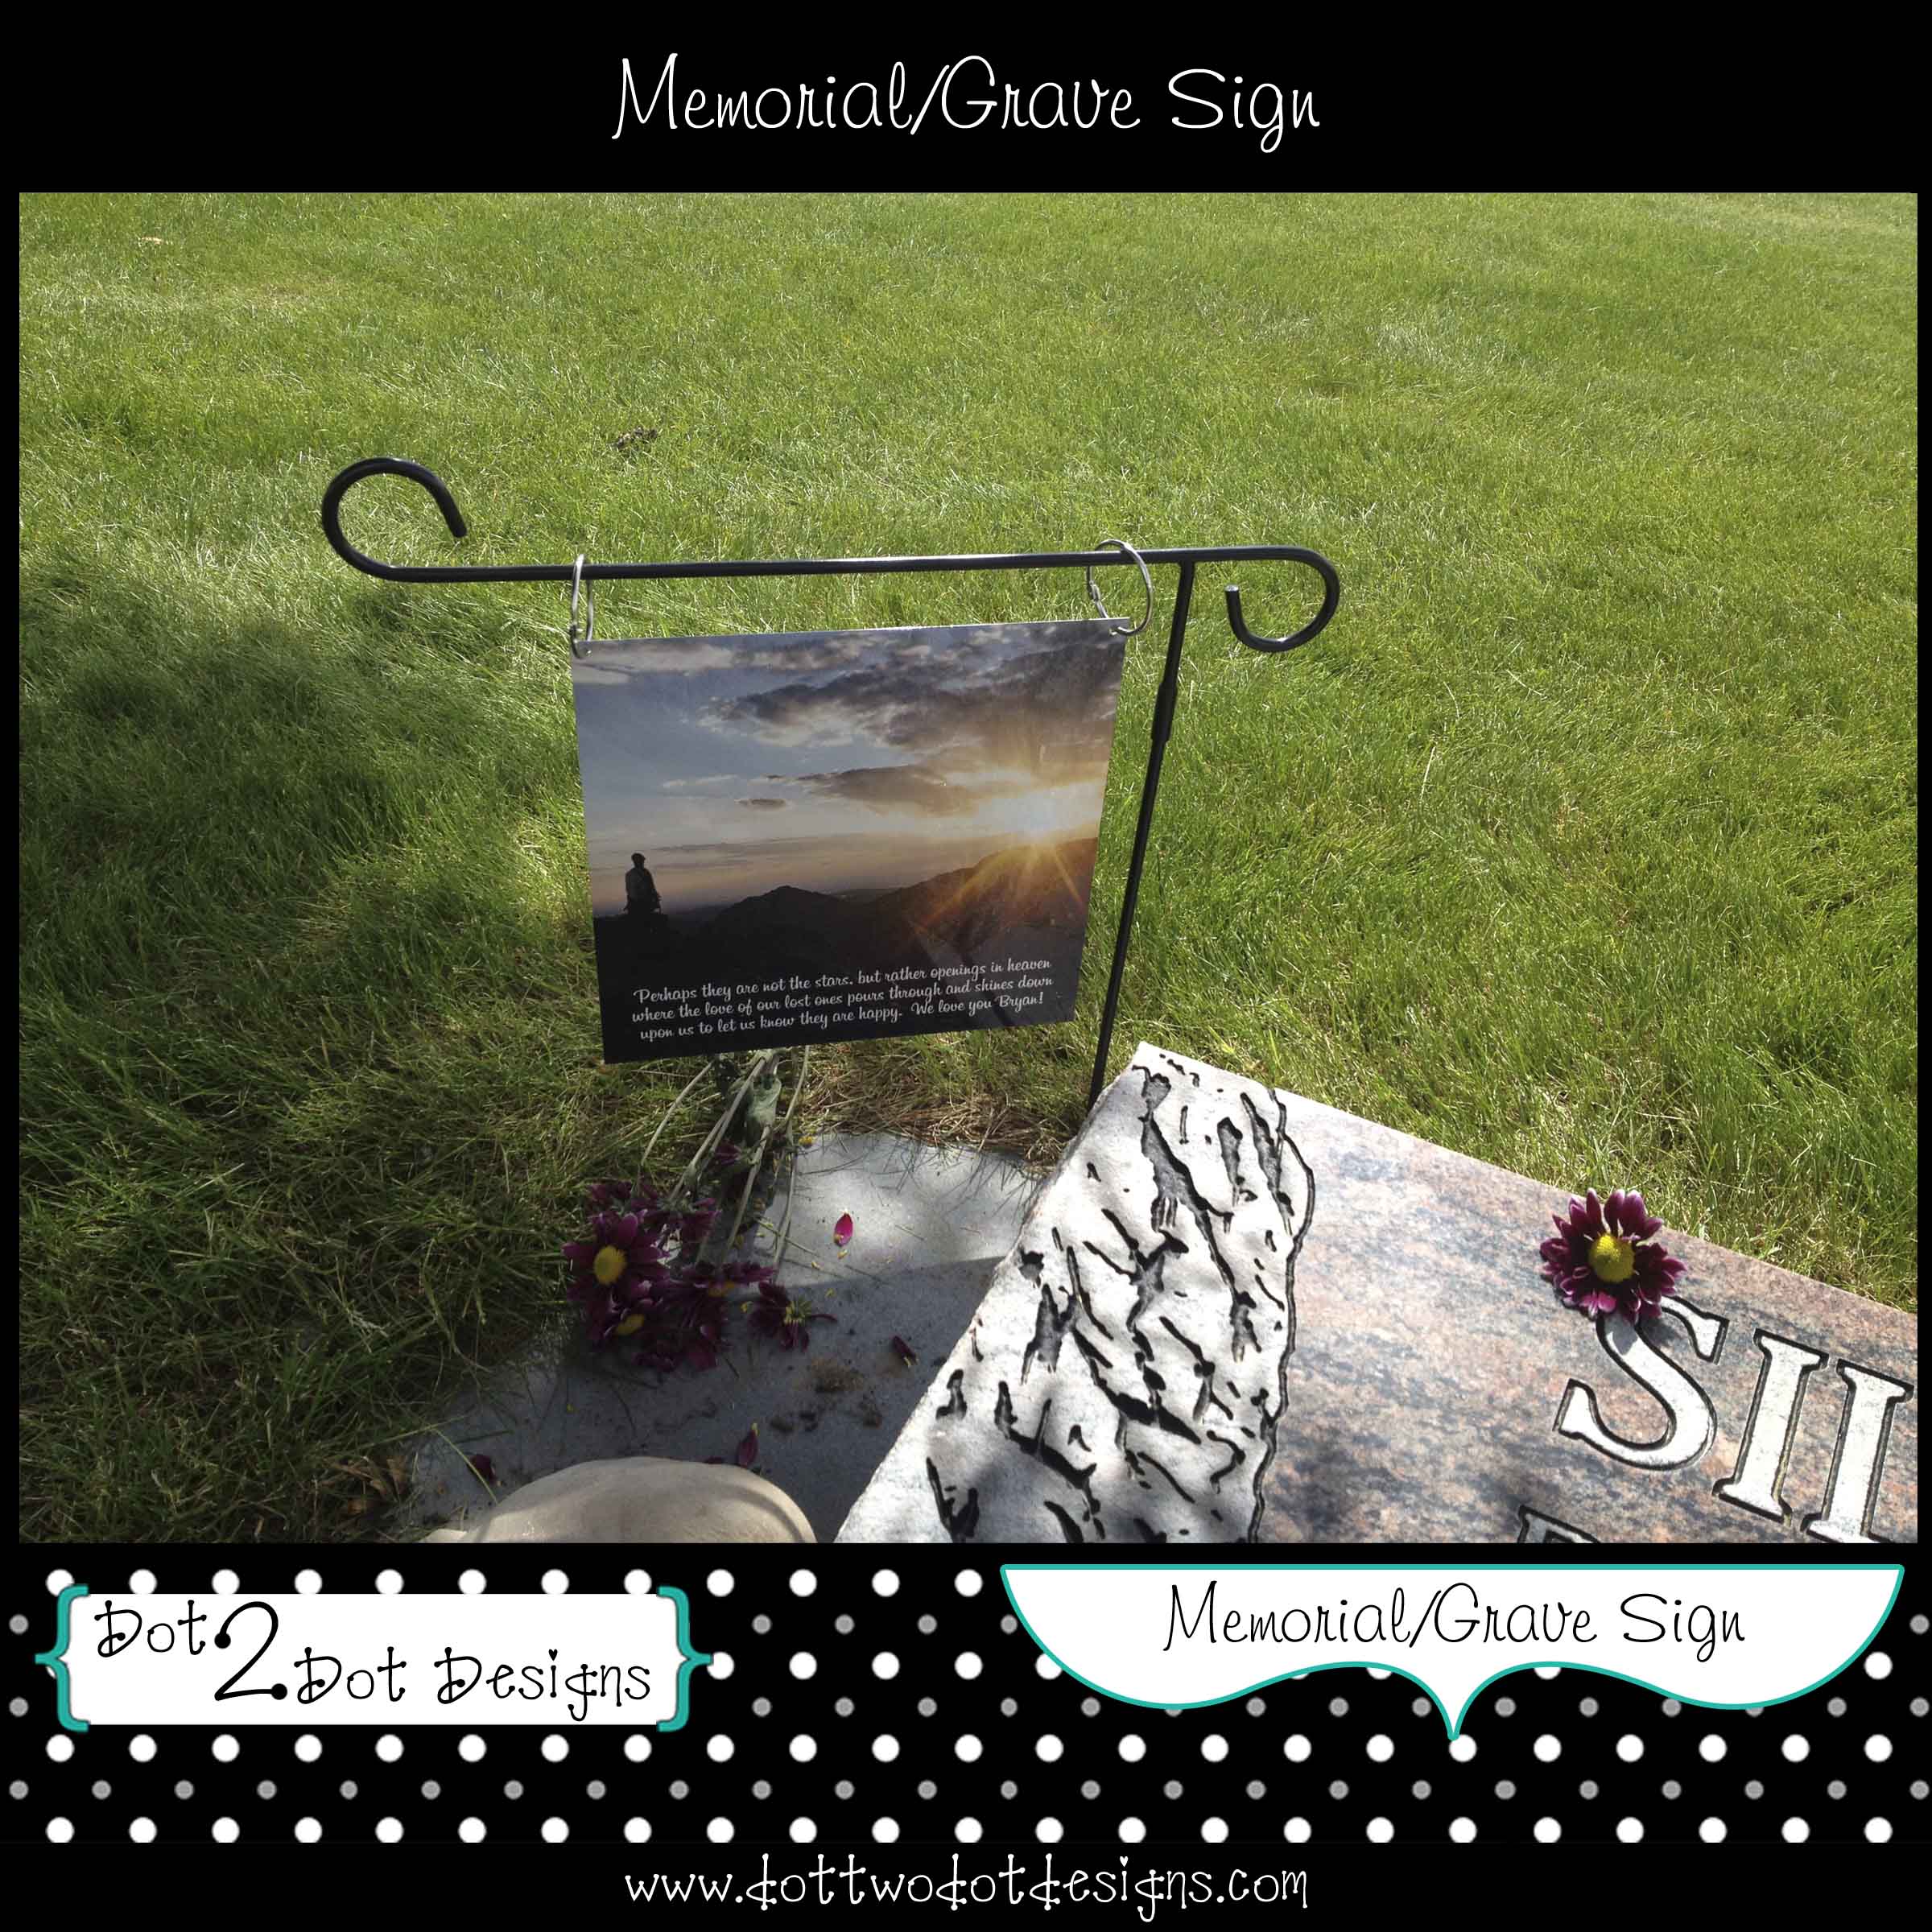 Metal Art Contest - Memorial/Grave Metal Sign made with sublimation printing